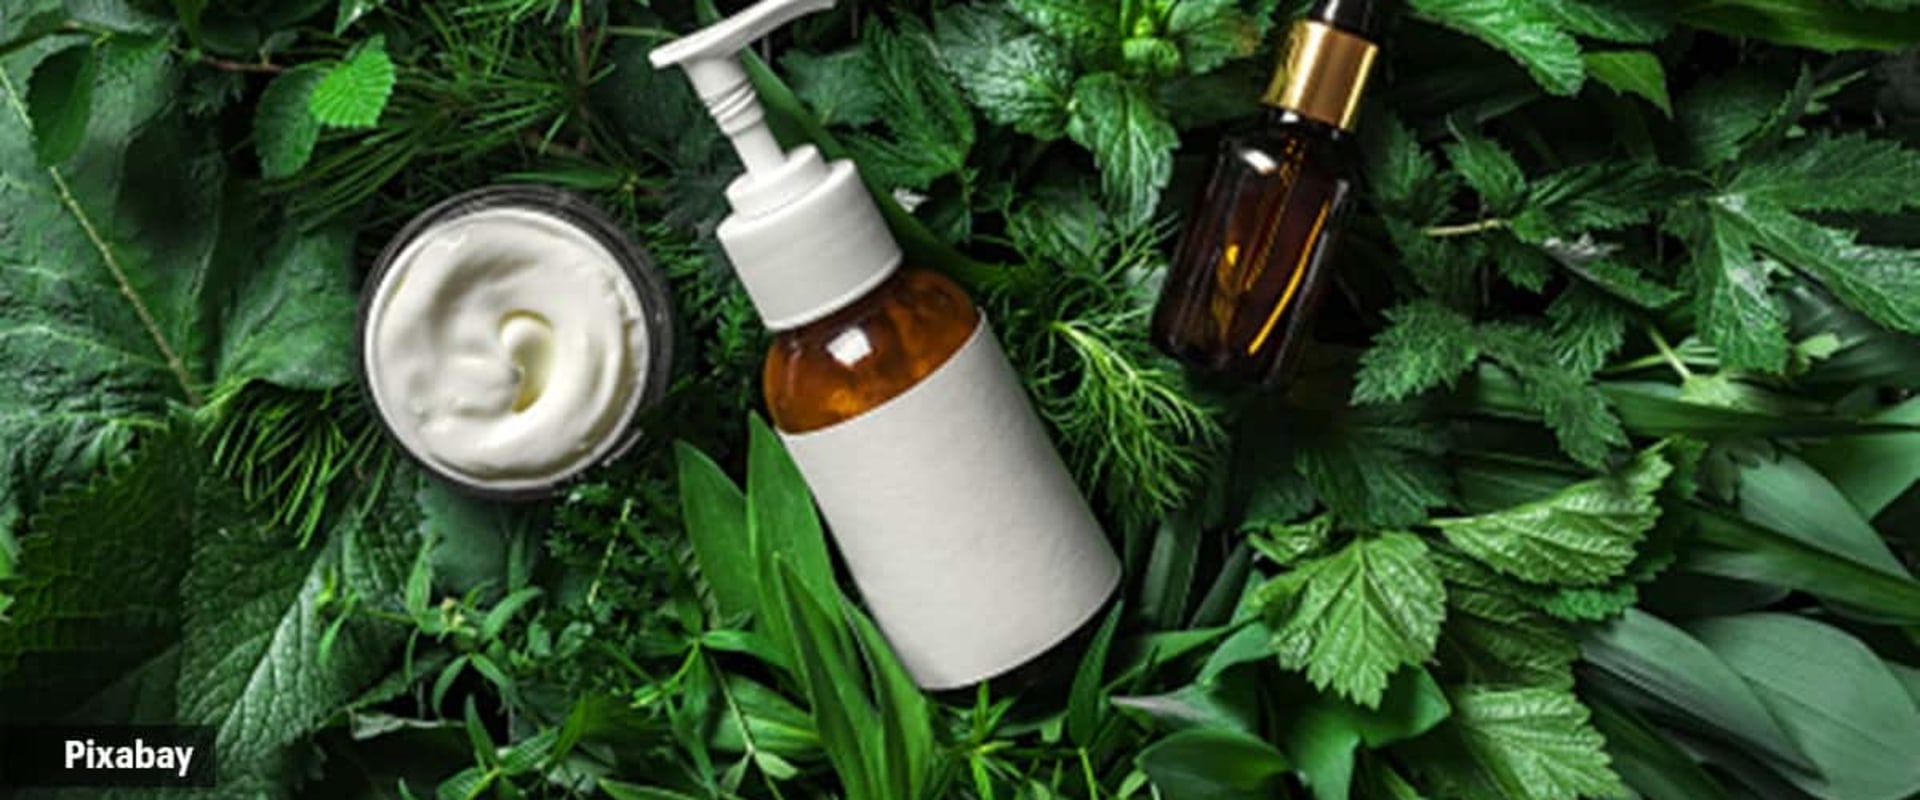 Are Natural Skincare Products Better for Your Skin Than Synthetic Products?